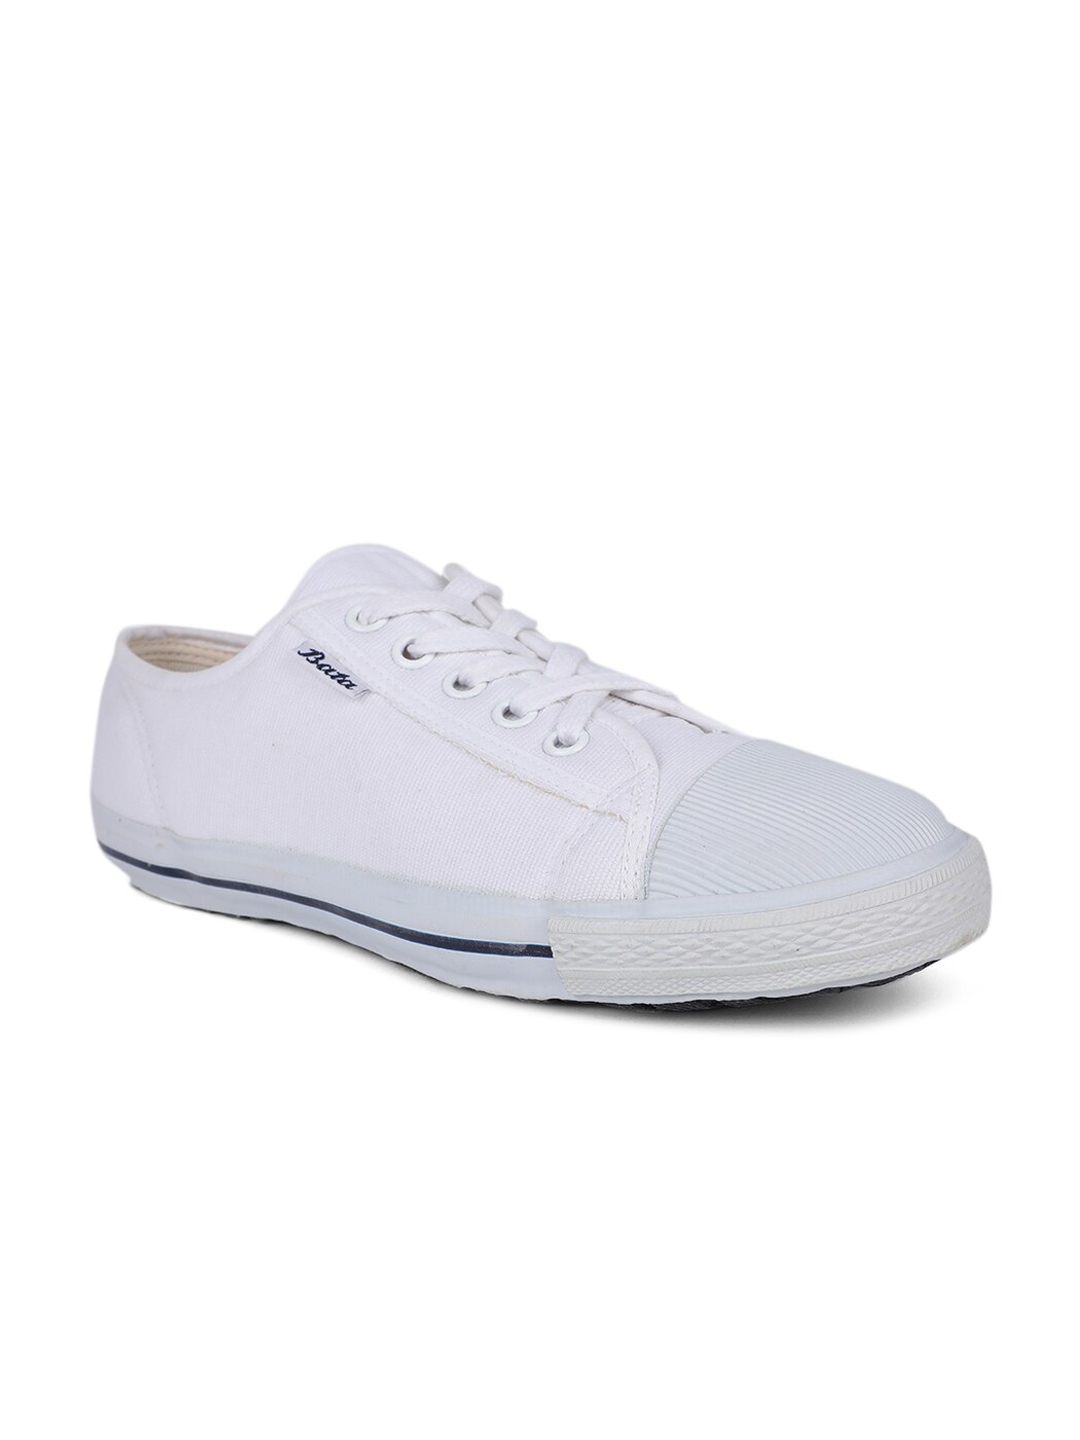 Buy Bata Men White Casual Sneakers - Casual Shoes for Men 18250962 | Myntra